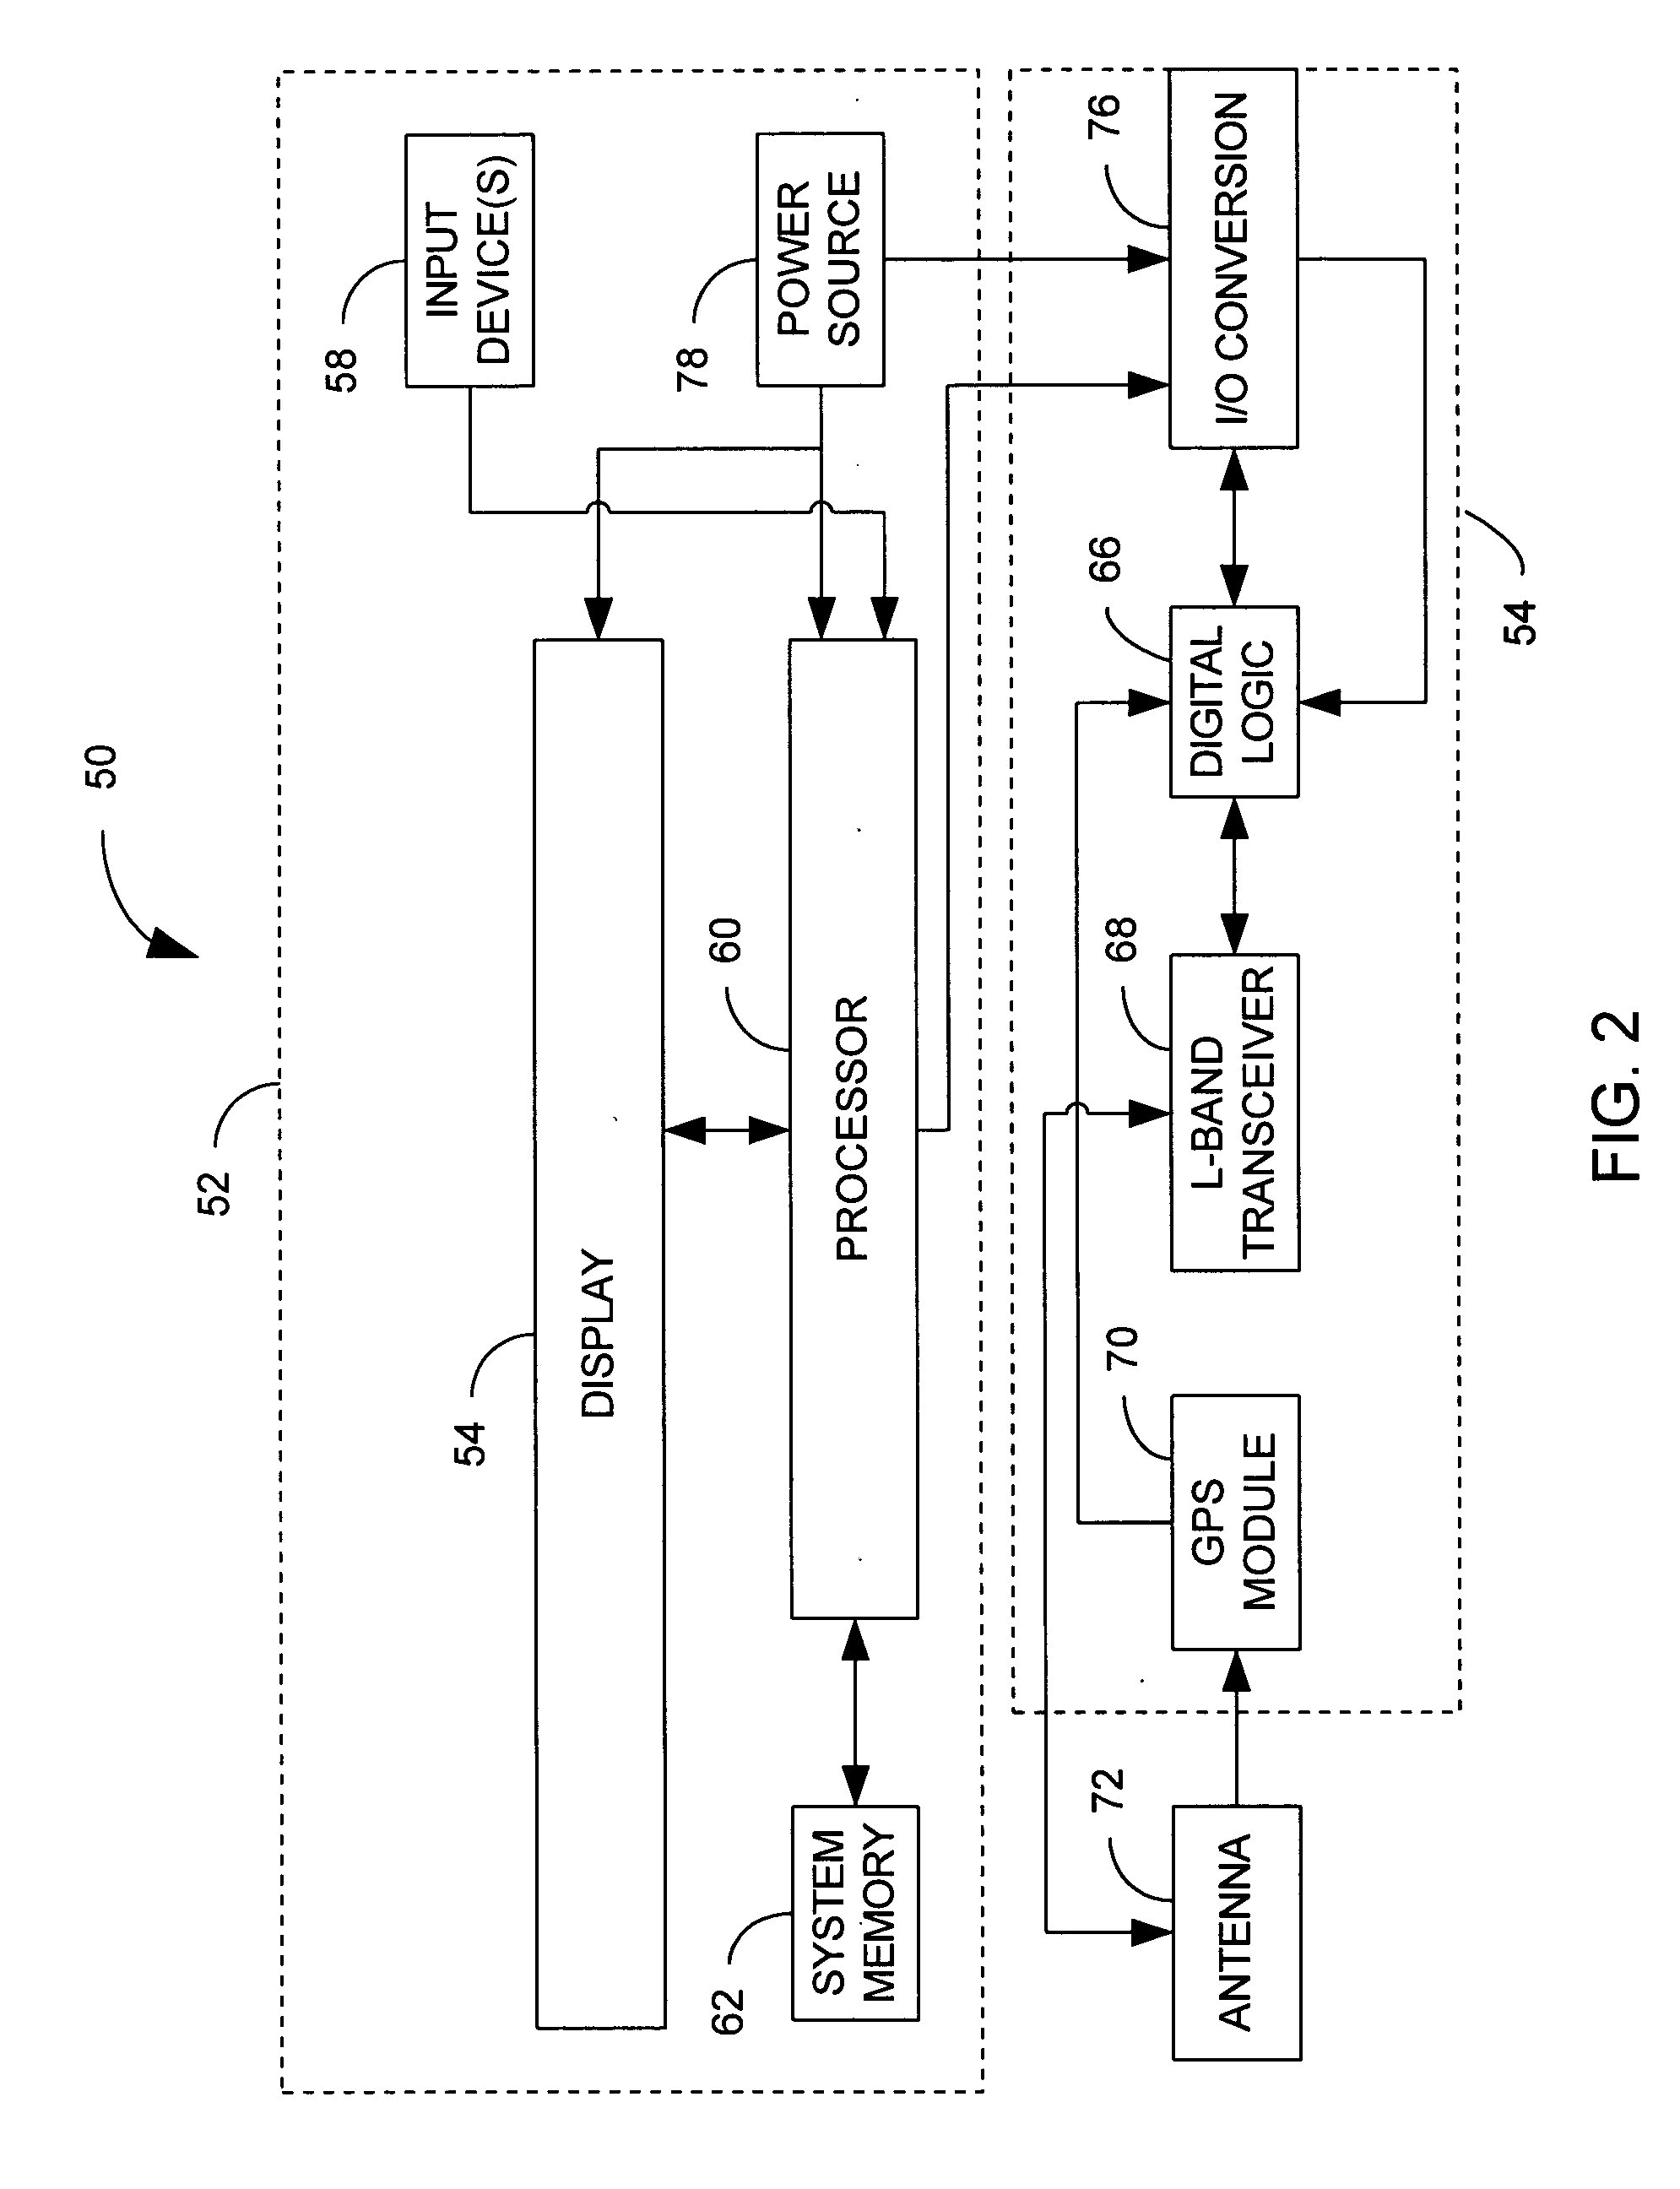 Dismount tablet computer assembly for wireless communication applications